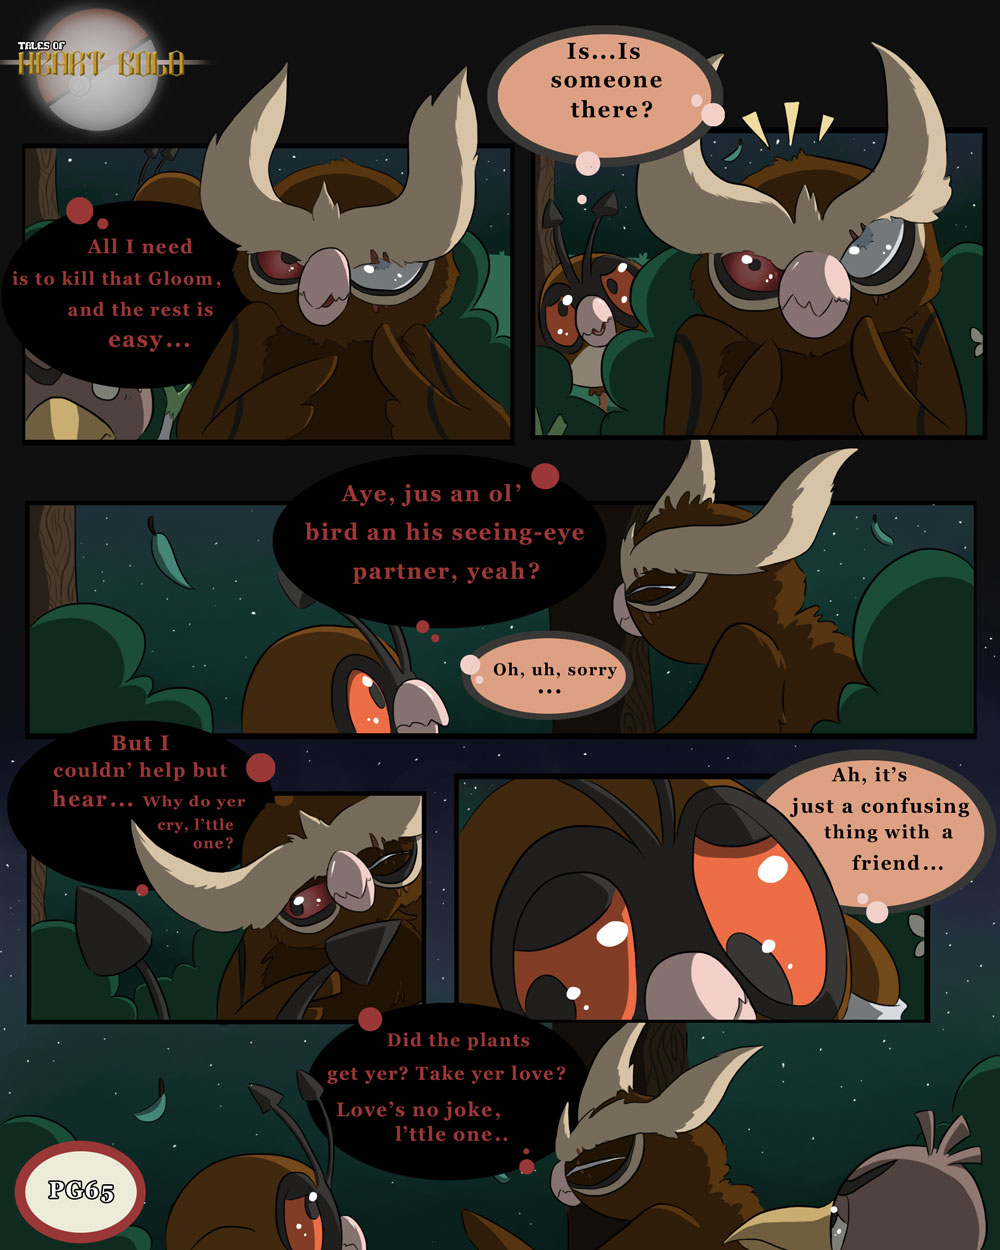 Into Woods PG19: Did They?